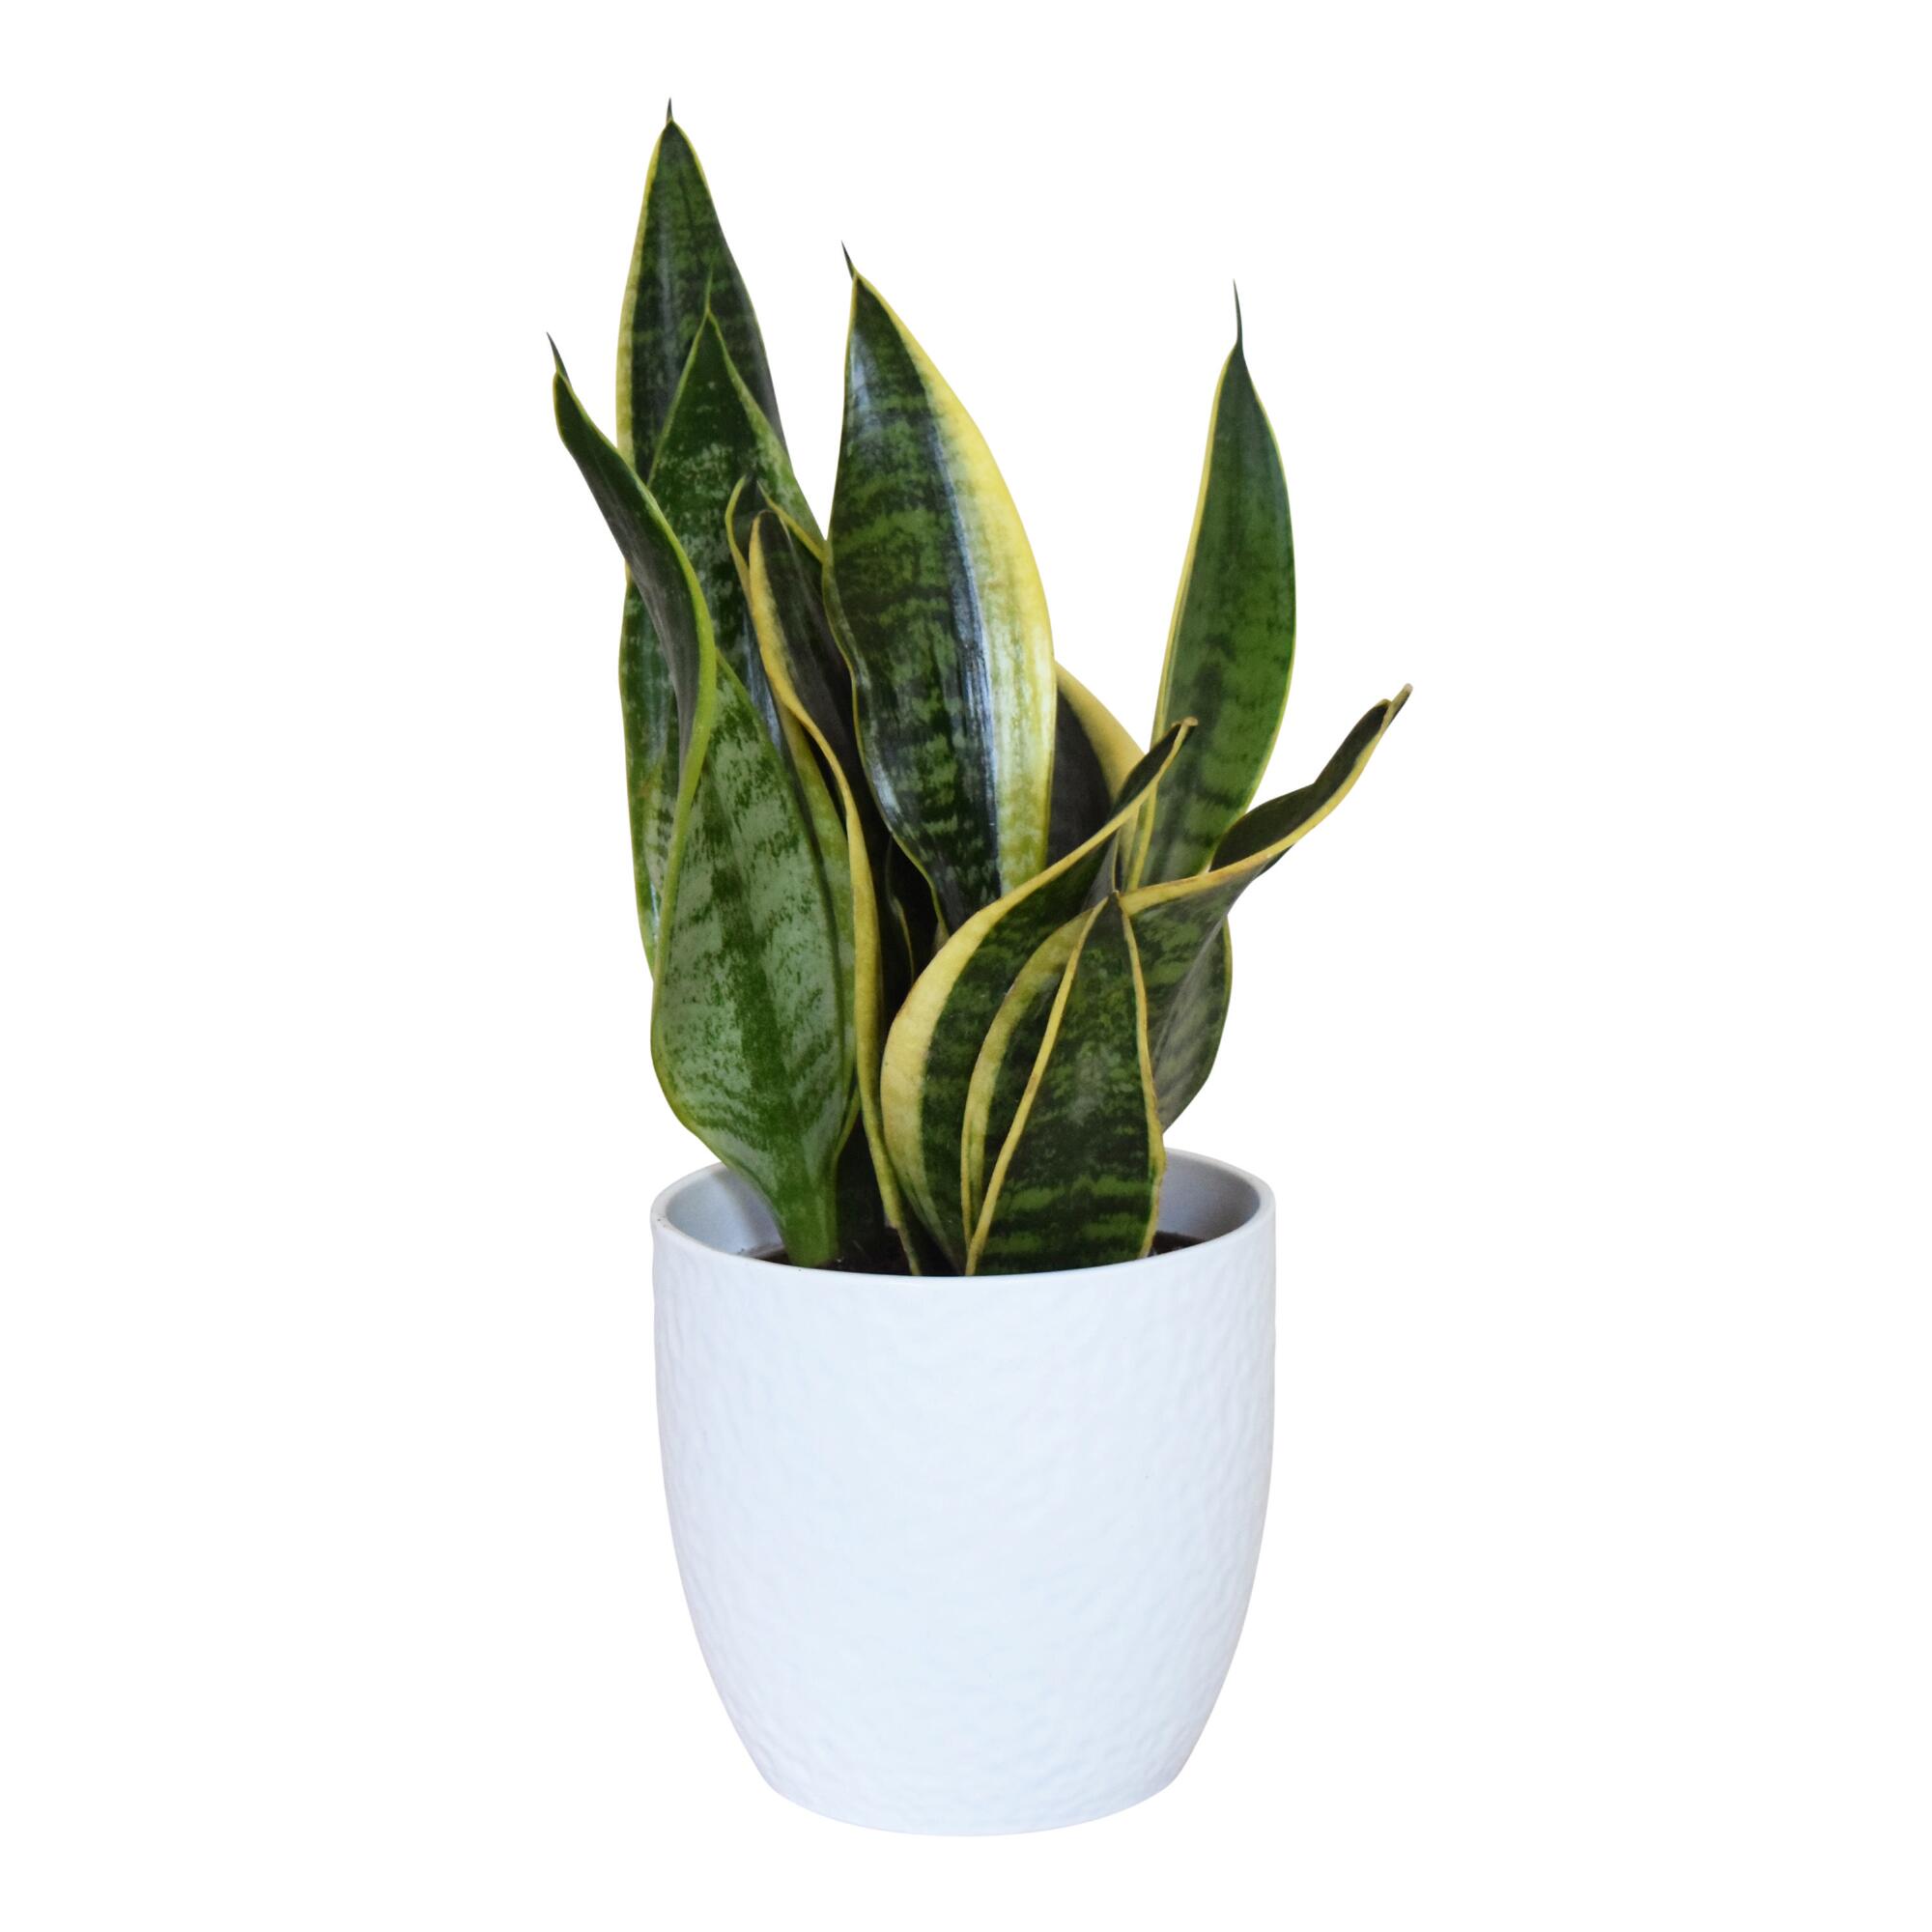 Live Sansevieria Plant in White Ceramic Pot: Green/Yellow by World Market